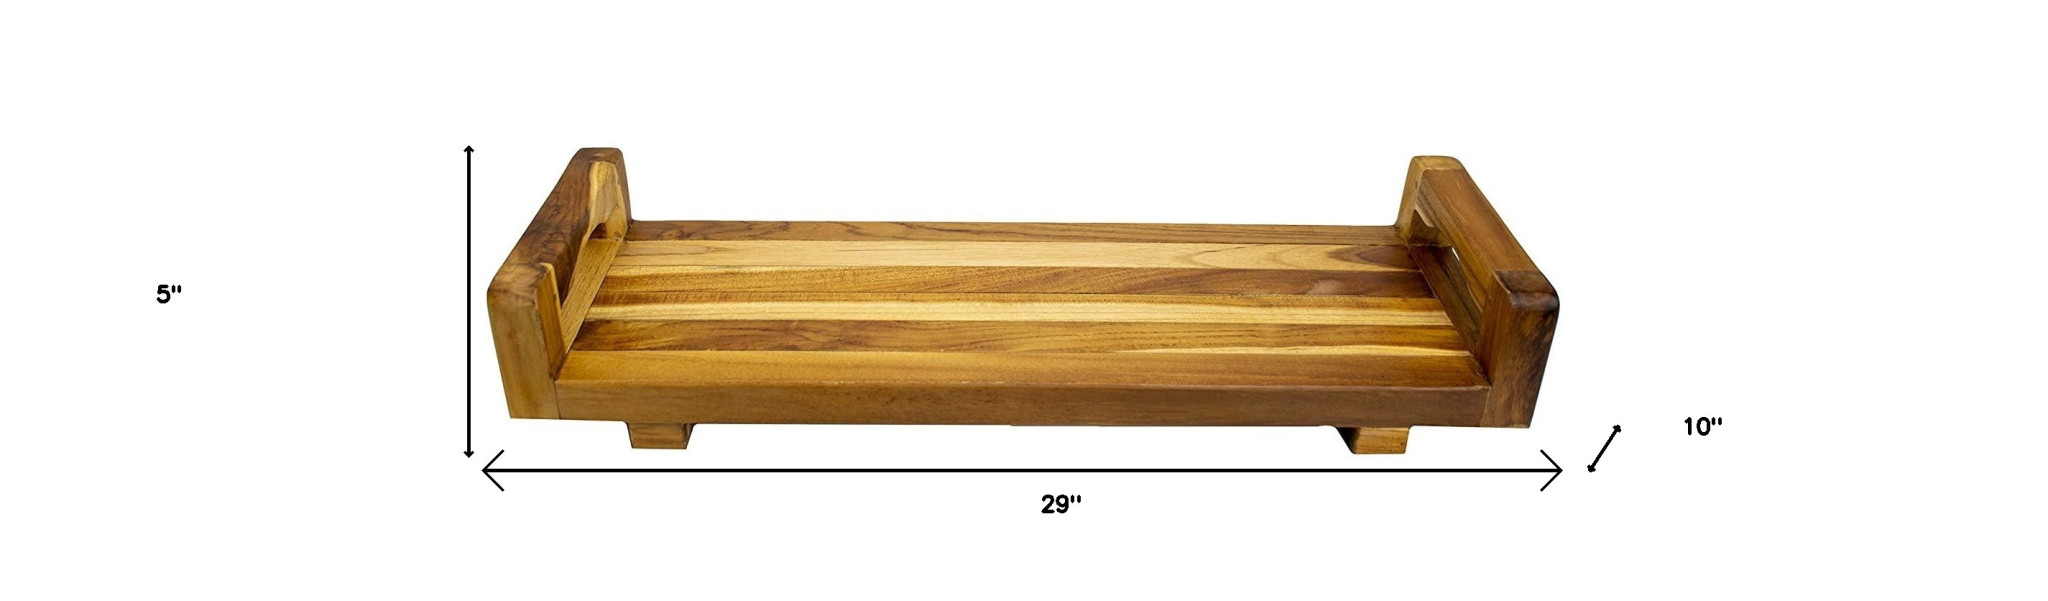 29" Teak Wood Fully Assembled Bath Tray and Seat with LiftAide Arms in Earthy Teak Finish